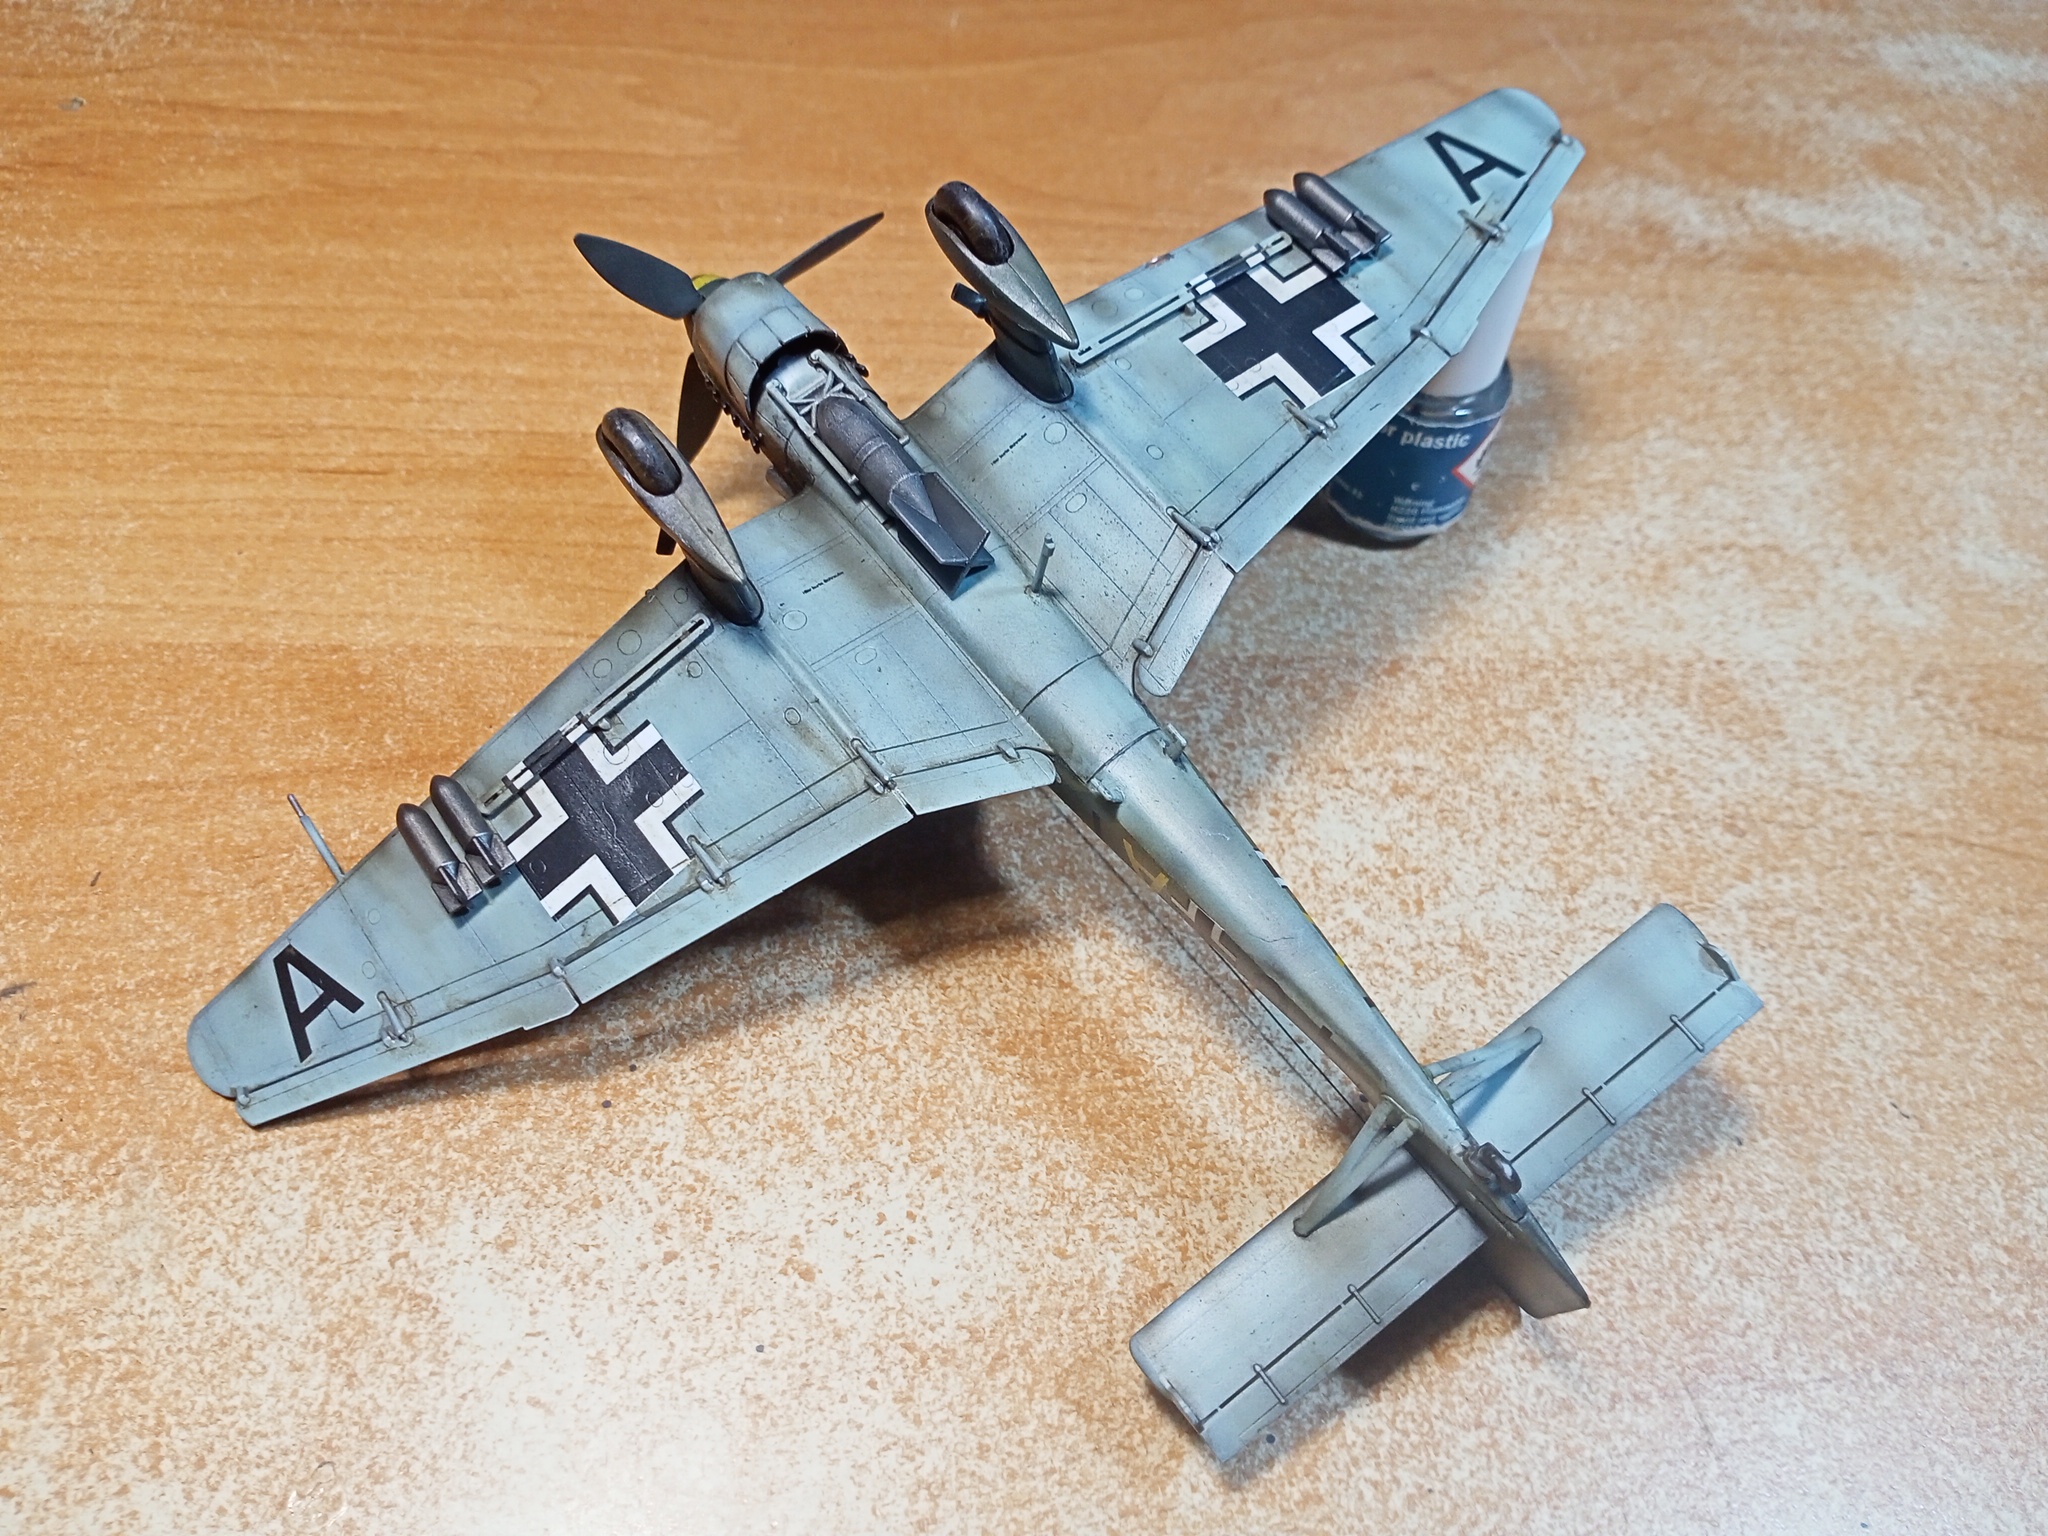 Junkers Ju.87B-2 Stuka (1/72 Zvezda). Assembly notes - My, Stand modeling, Modeling, Scale model, Miniature, Painting miniatures, With your own hands, Needlework with process, Needlework, Aviation, The Second World War, Airplane, Germany, Luftwaffe, Prefabricated model, Airbrushing, Overview, Bomber, Junkers, Thing, Longpost